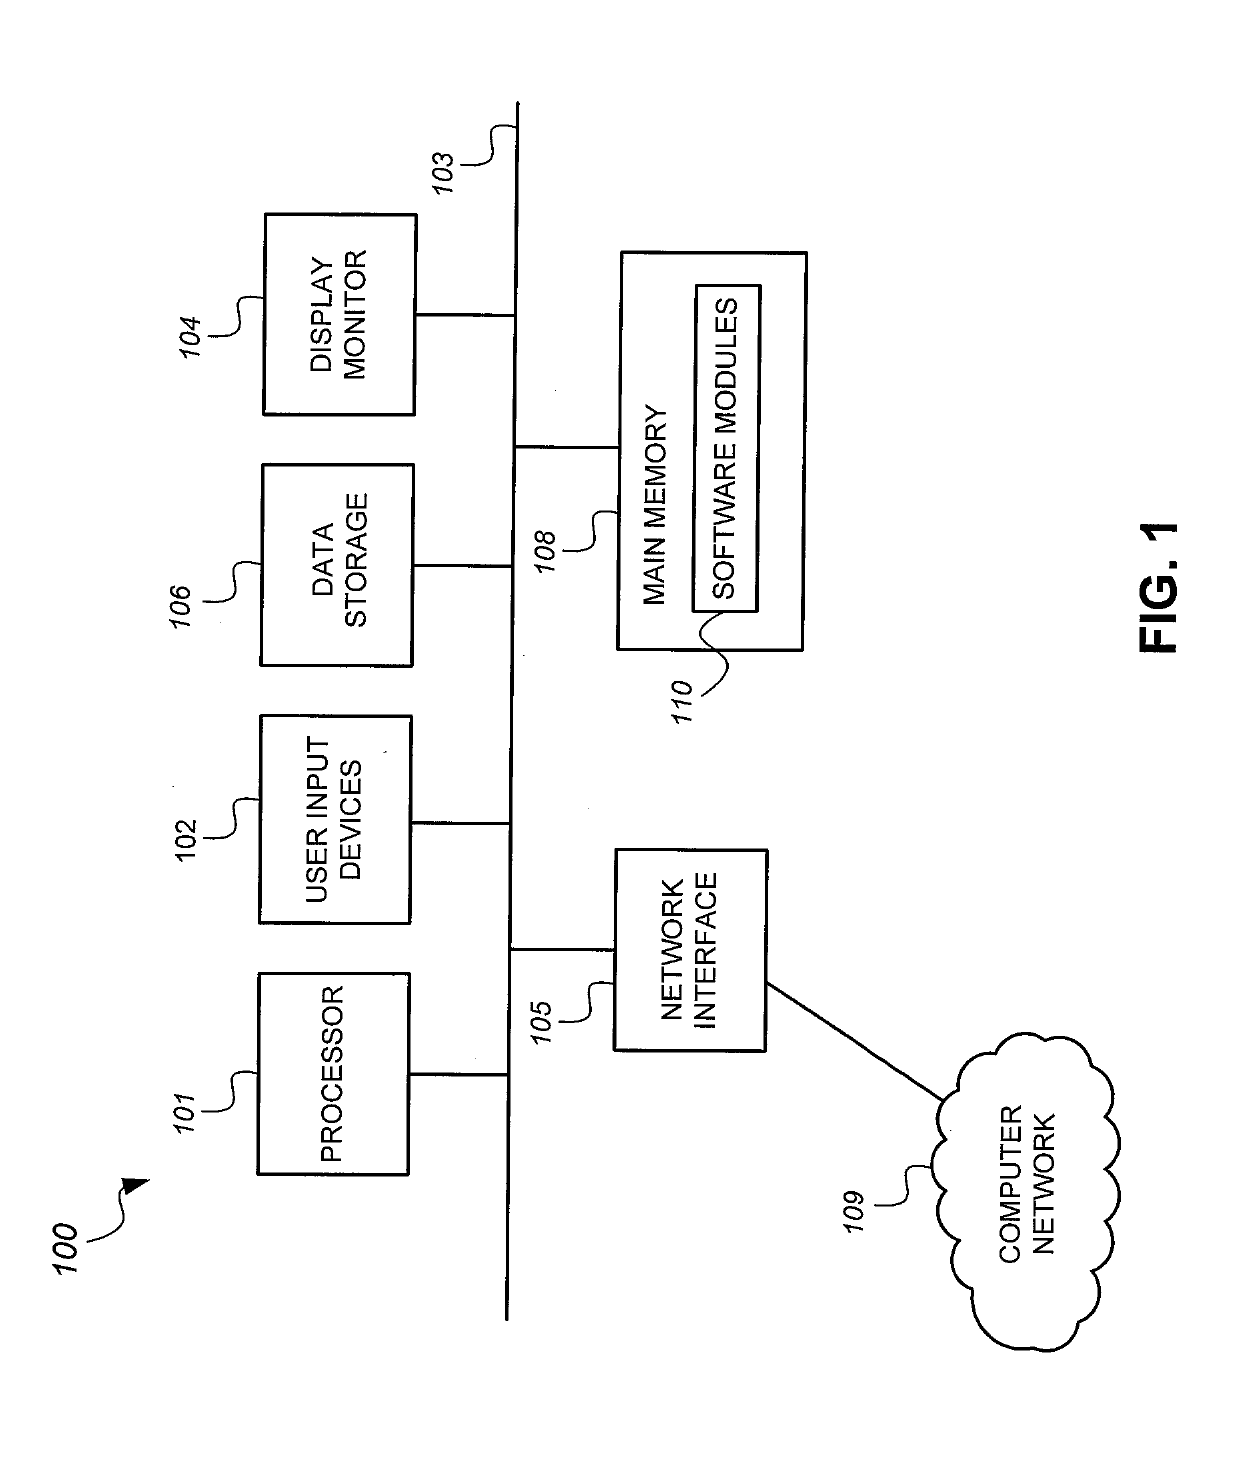 Automatic multi-chassis link aggregation configuration with link layer discovery